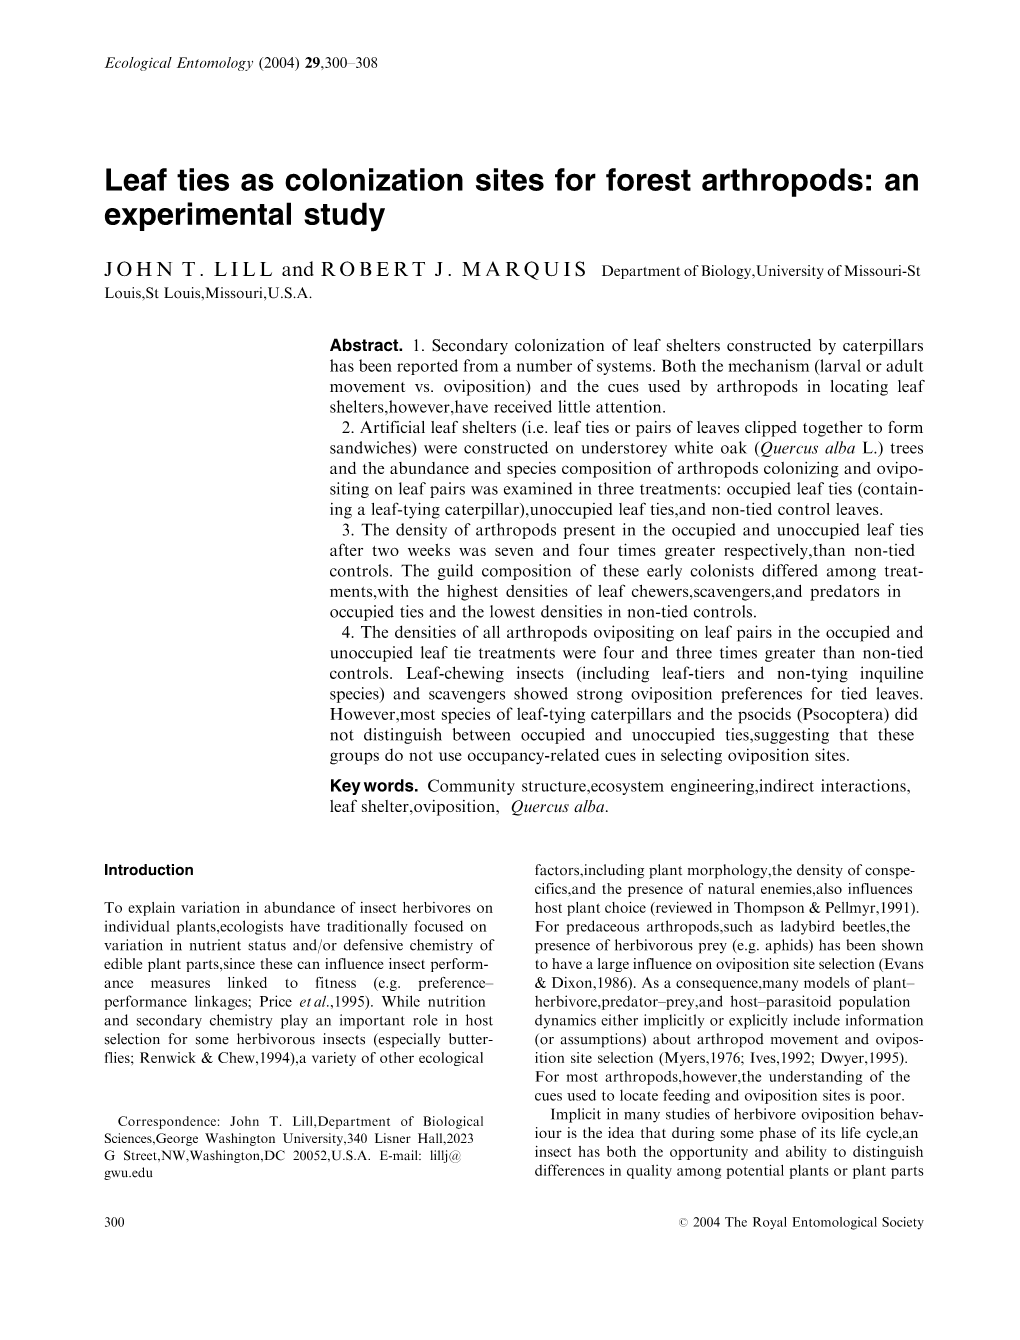 Leaf Ties As Colonization Sites for Forest Arthropods: an Experimental Study